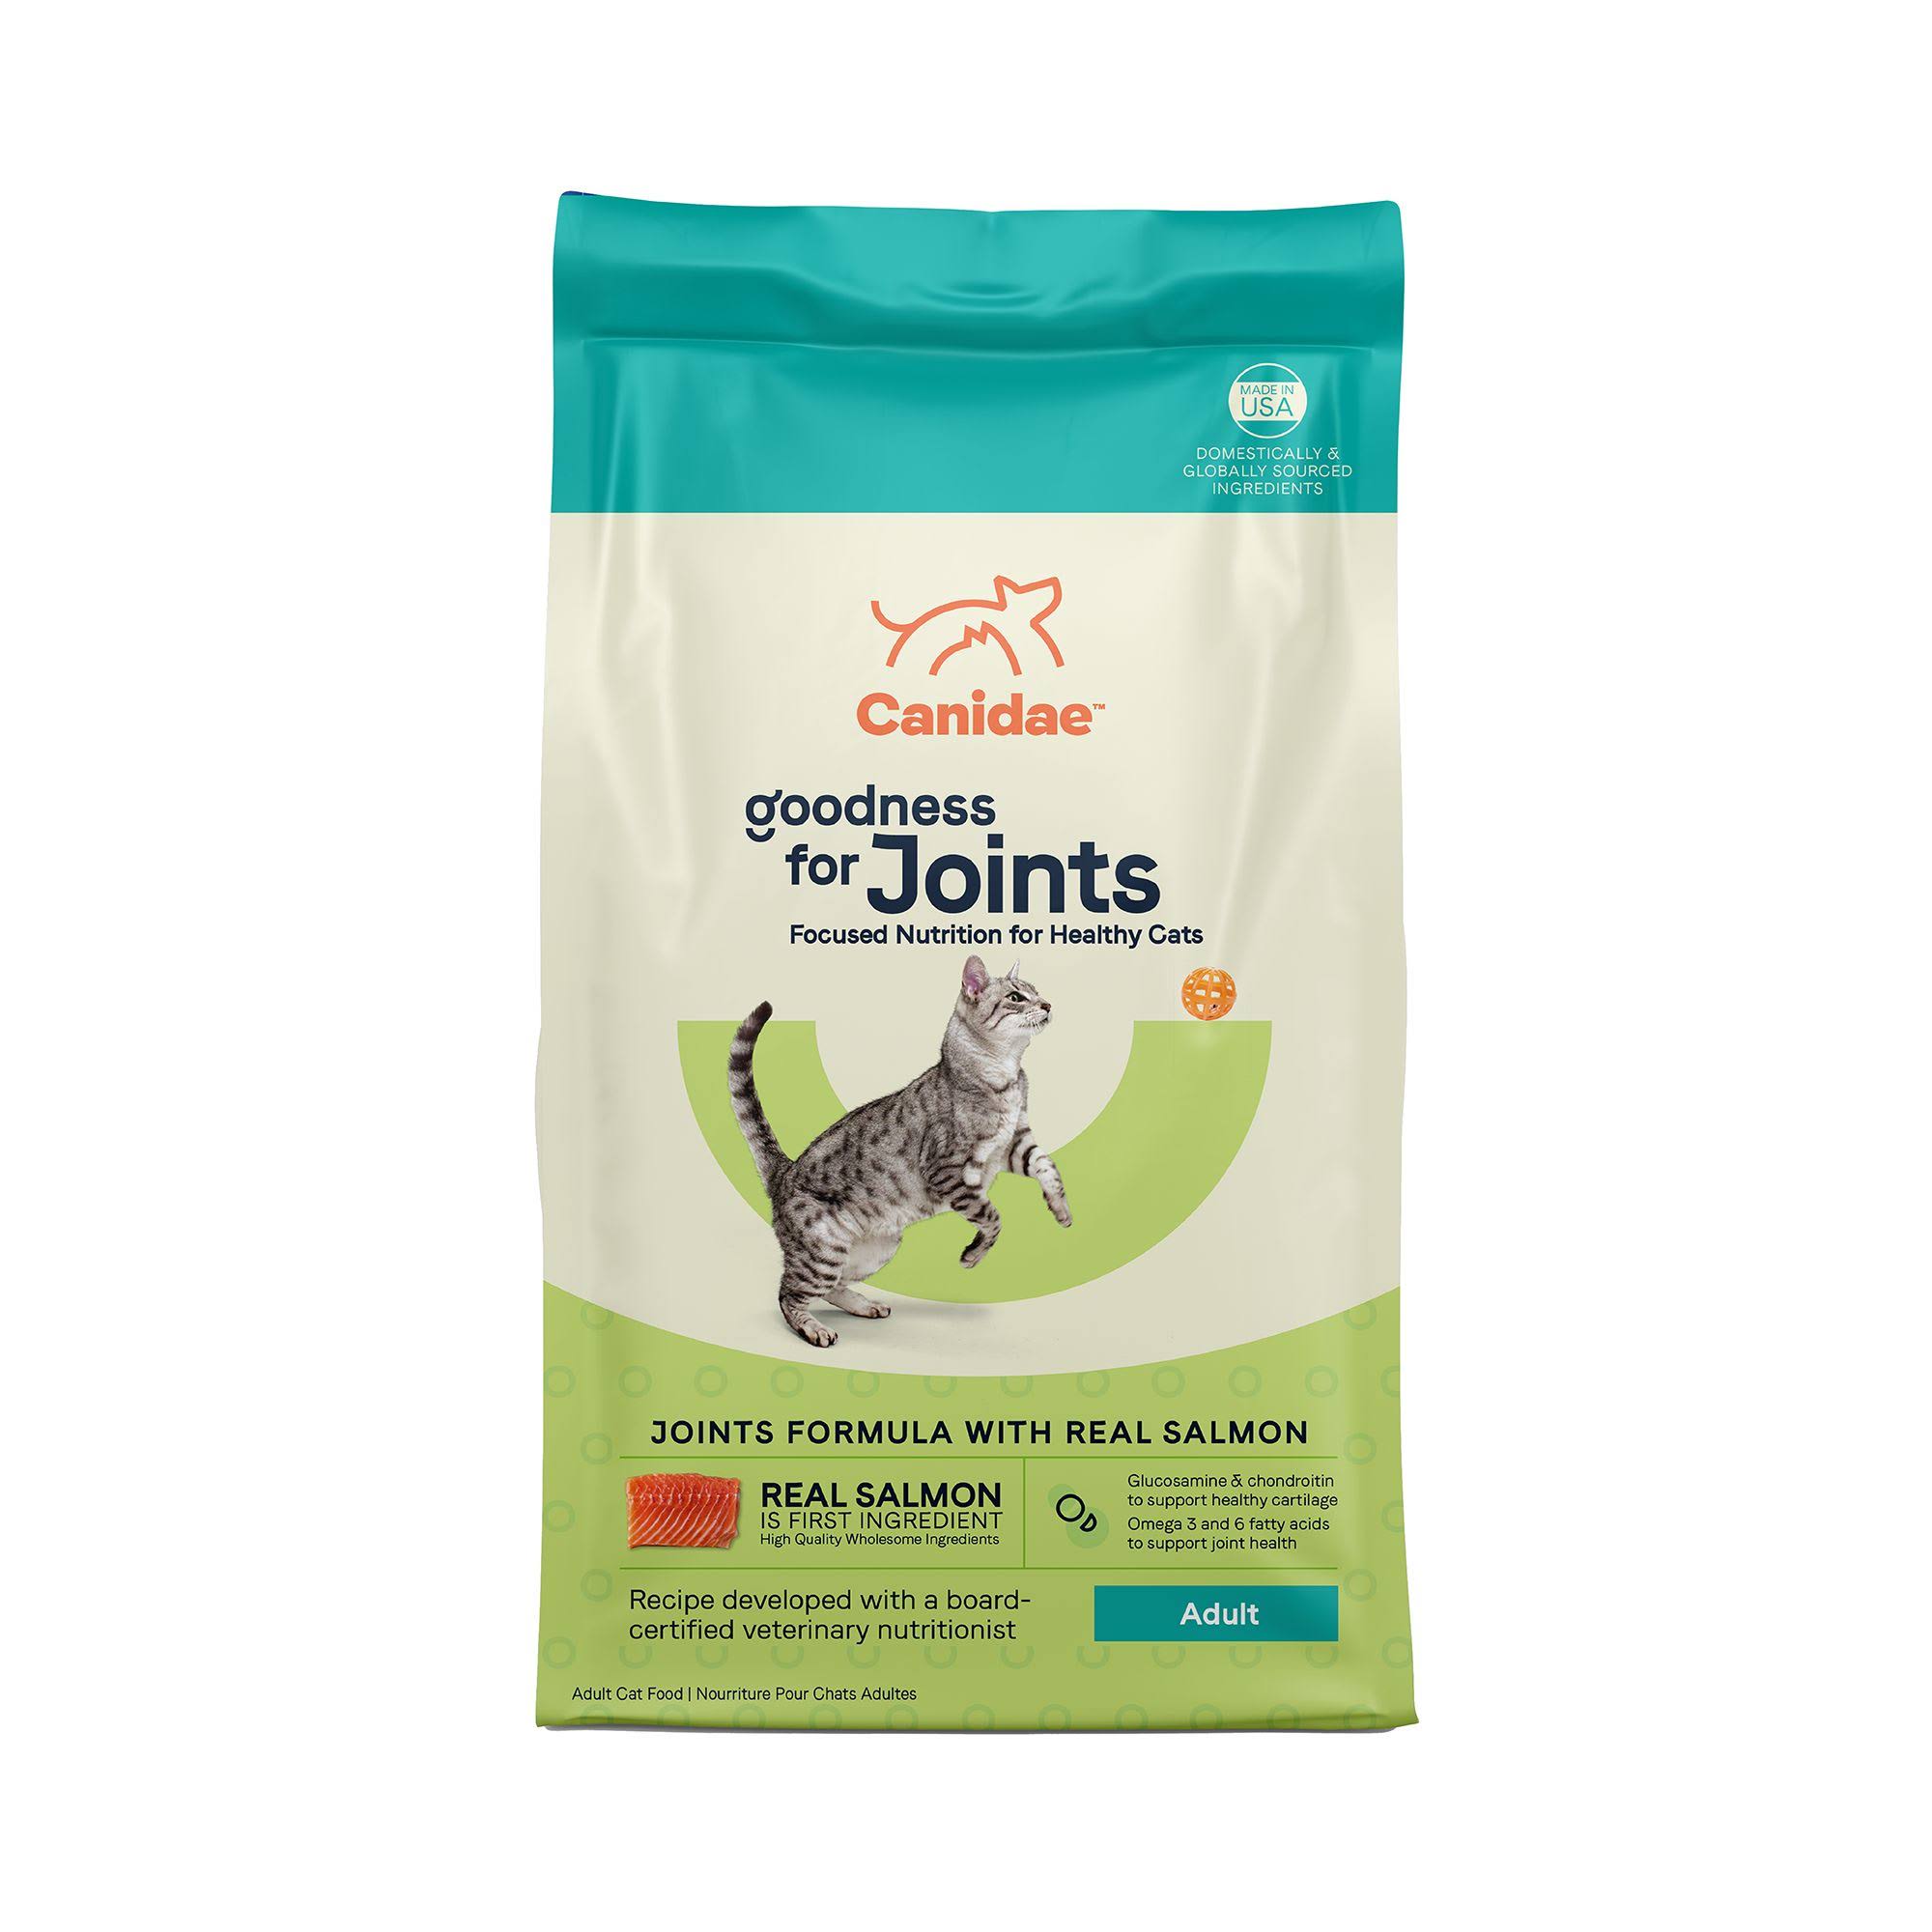 Canidae Goodness Adult Dry Cat Food - Joint Health, Salmon | PetSmart